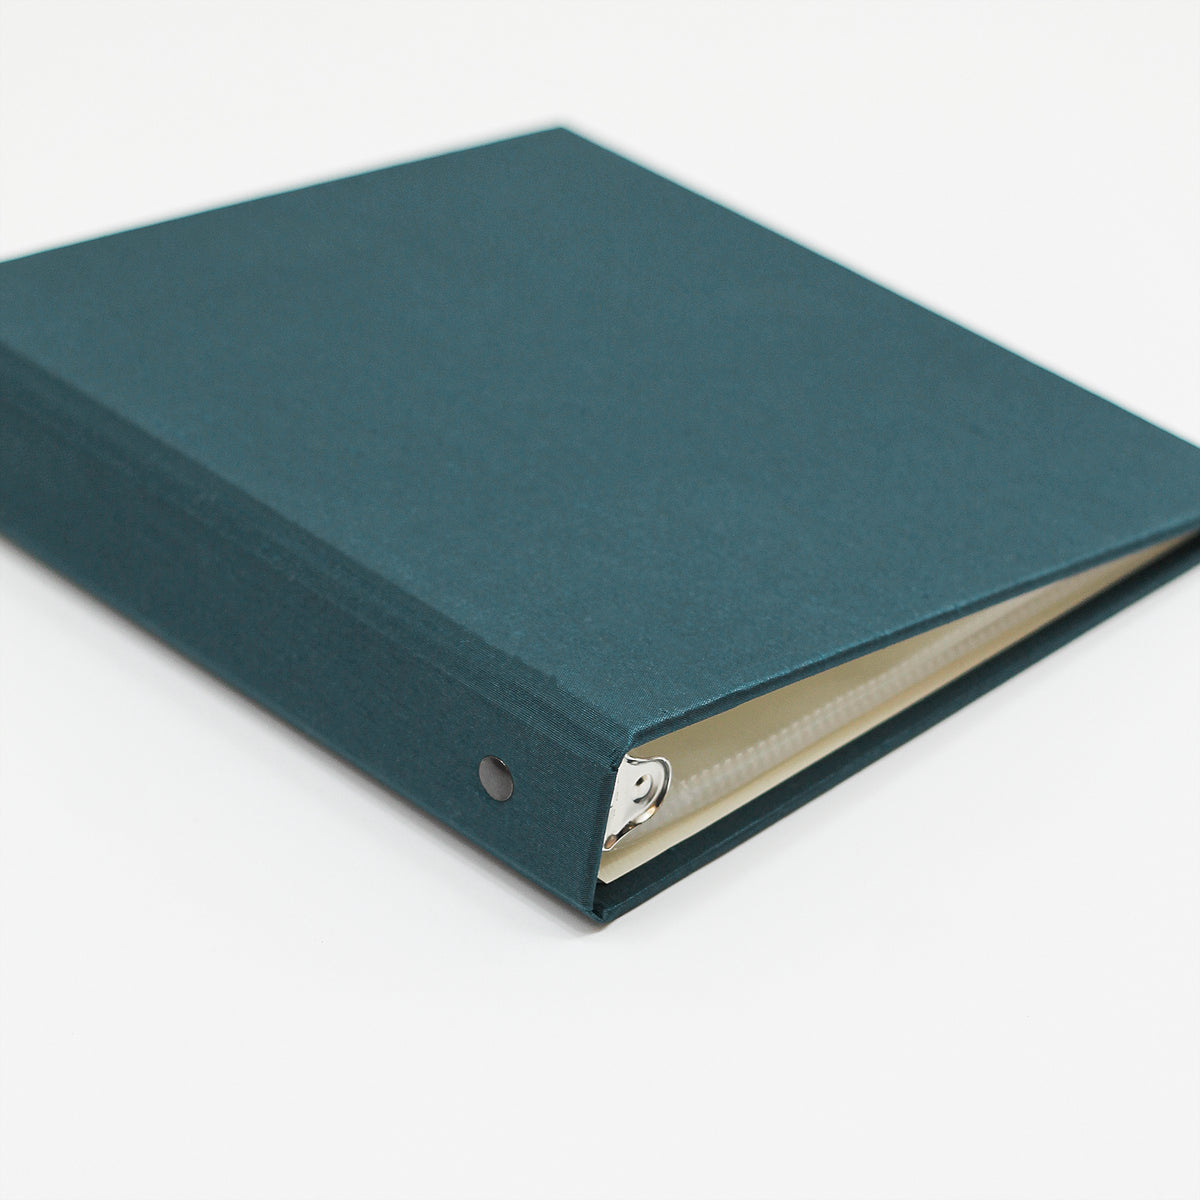 Medium Photo Binder For 4x6 Photos | Cover: Teal Blue Silk | Available Personalized